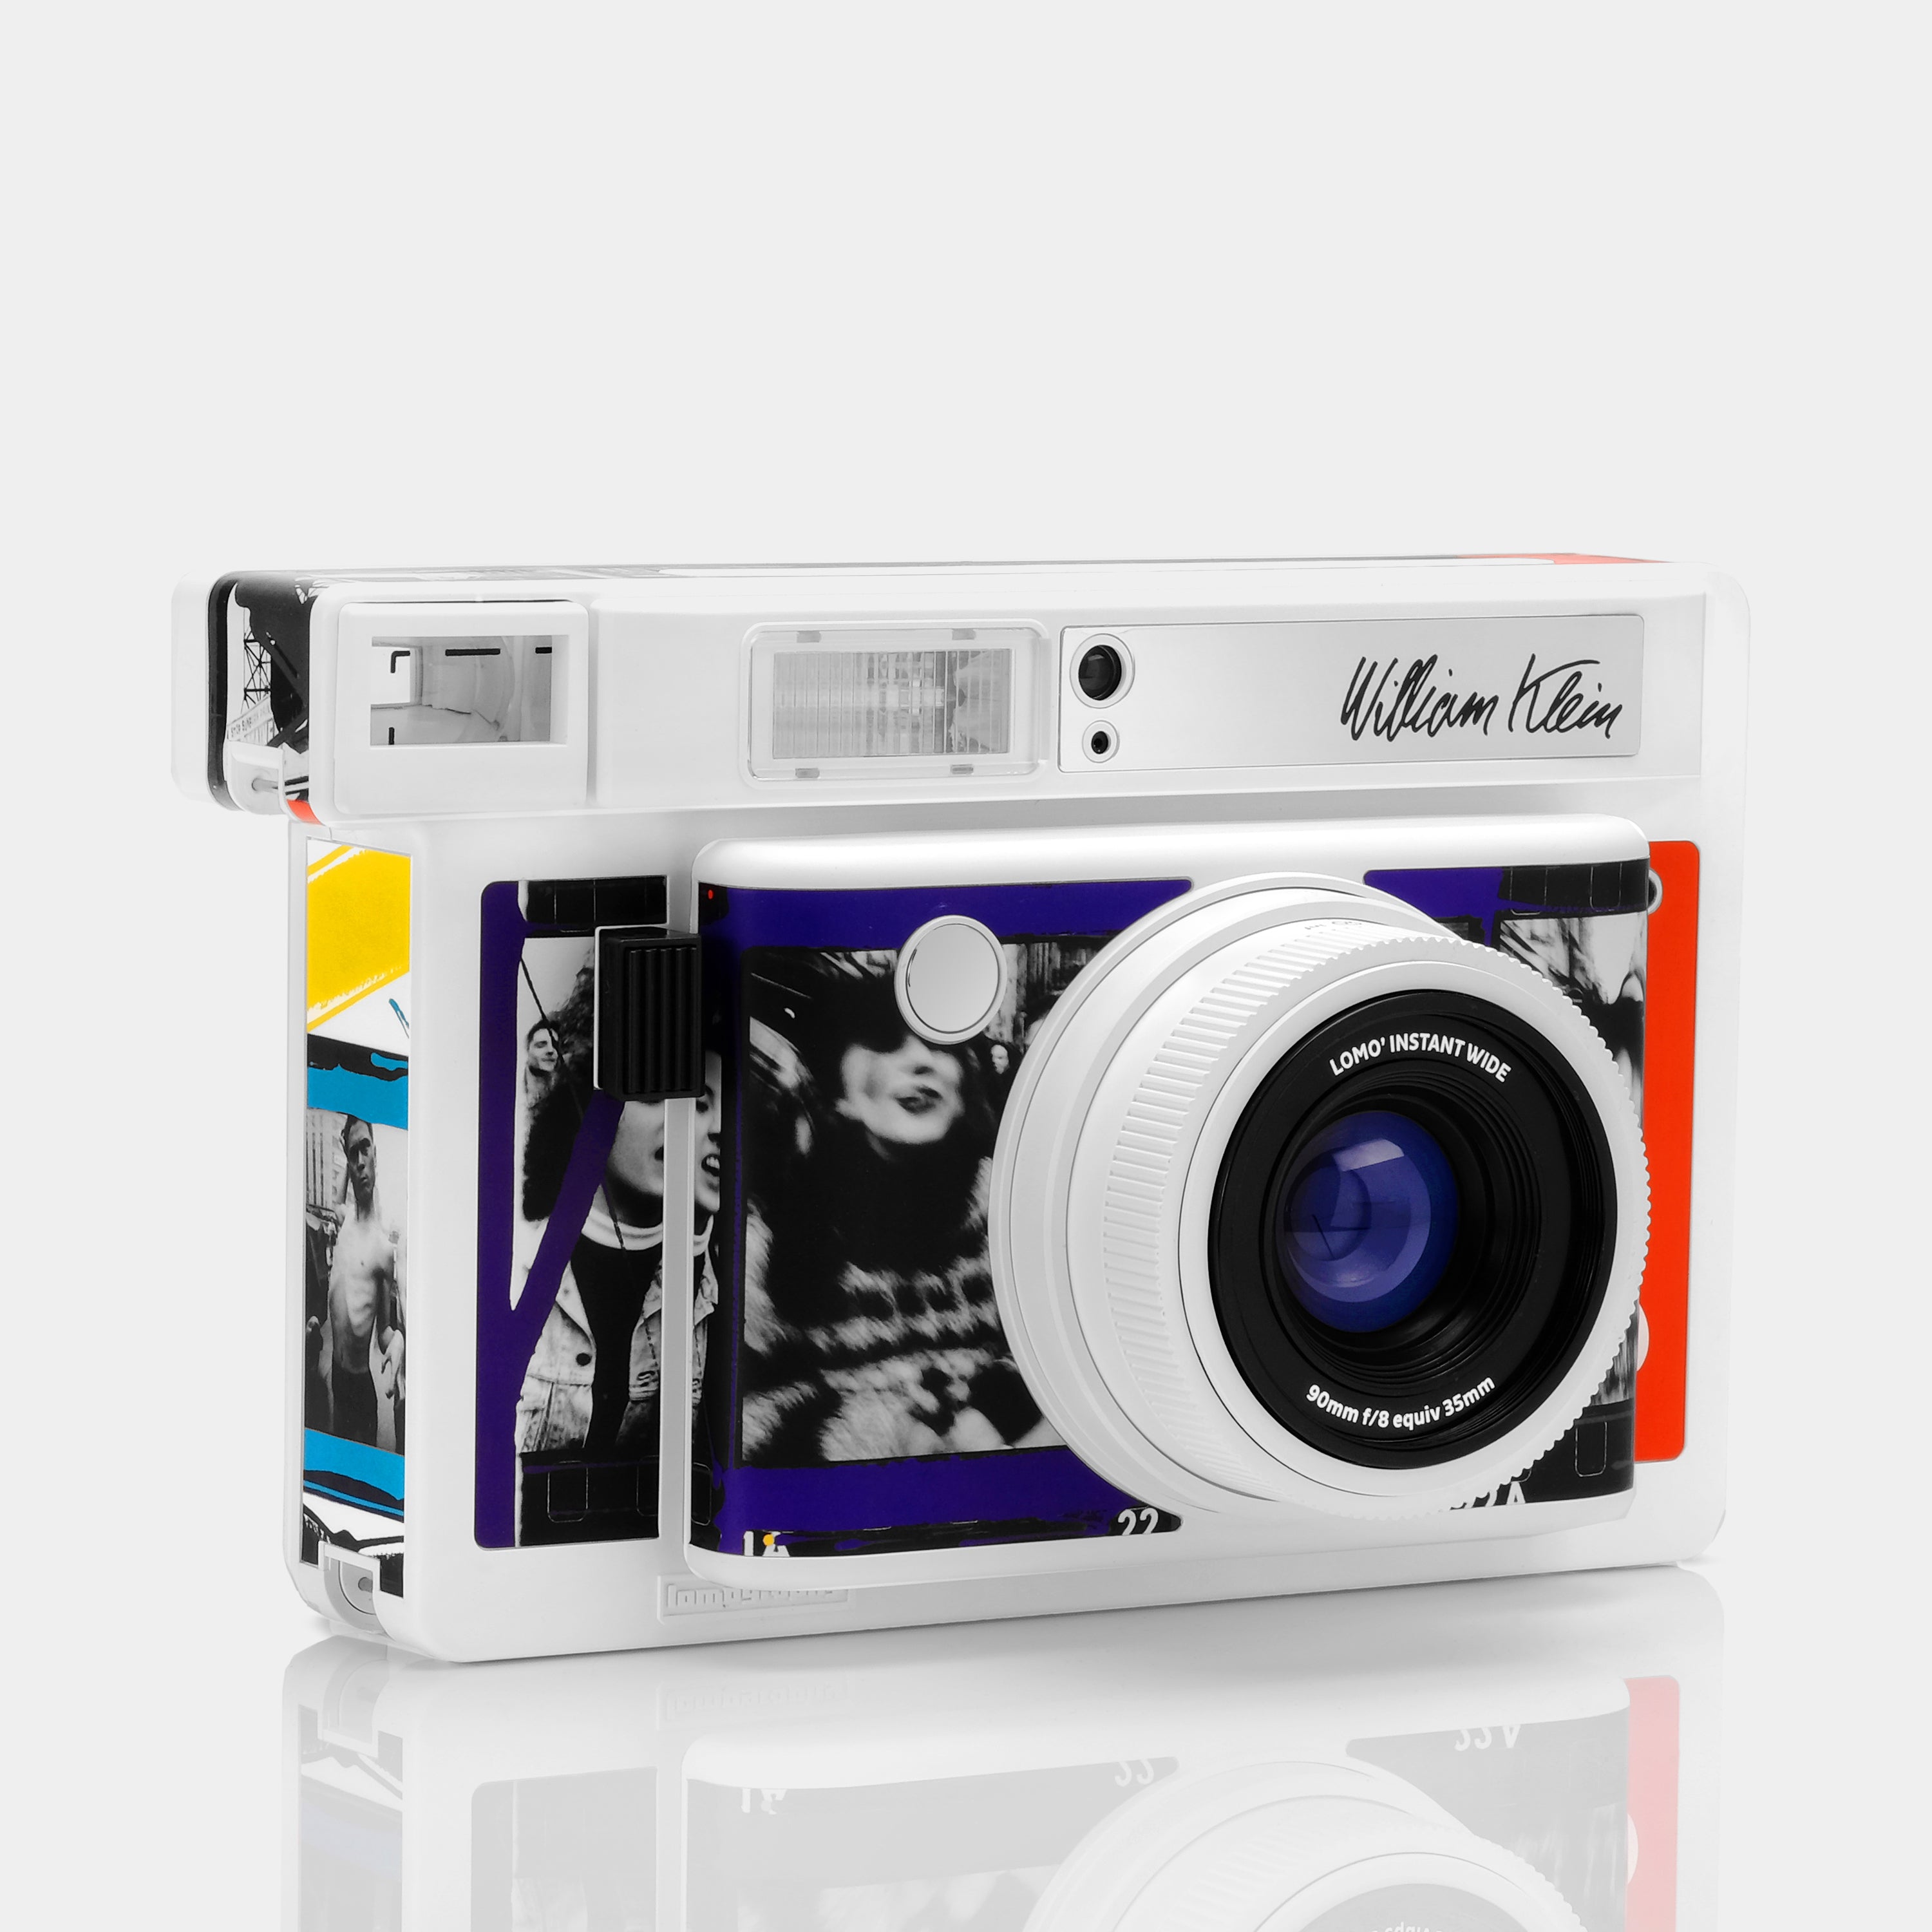 Lomography Lomo'Instant Wide (William Klein Edition) Instax Instant Film Camera and Lenses